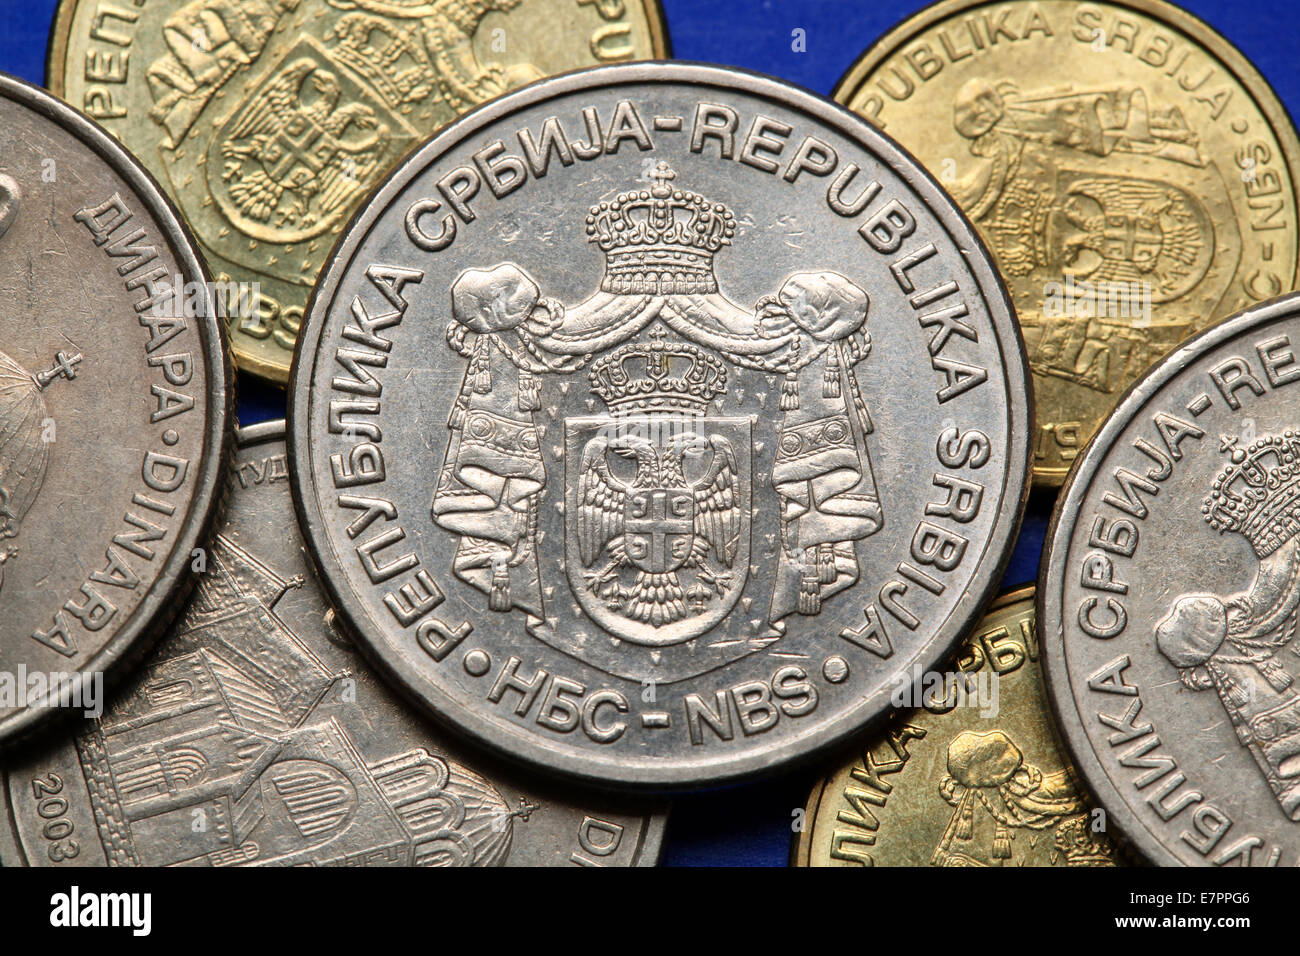 Coins of Serbia. Serbian national coats of arms depicted in Serbian dinar coins. Stock Photo